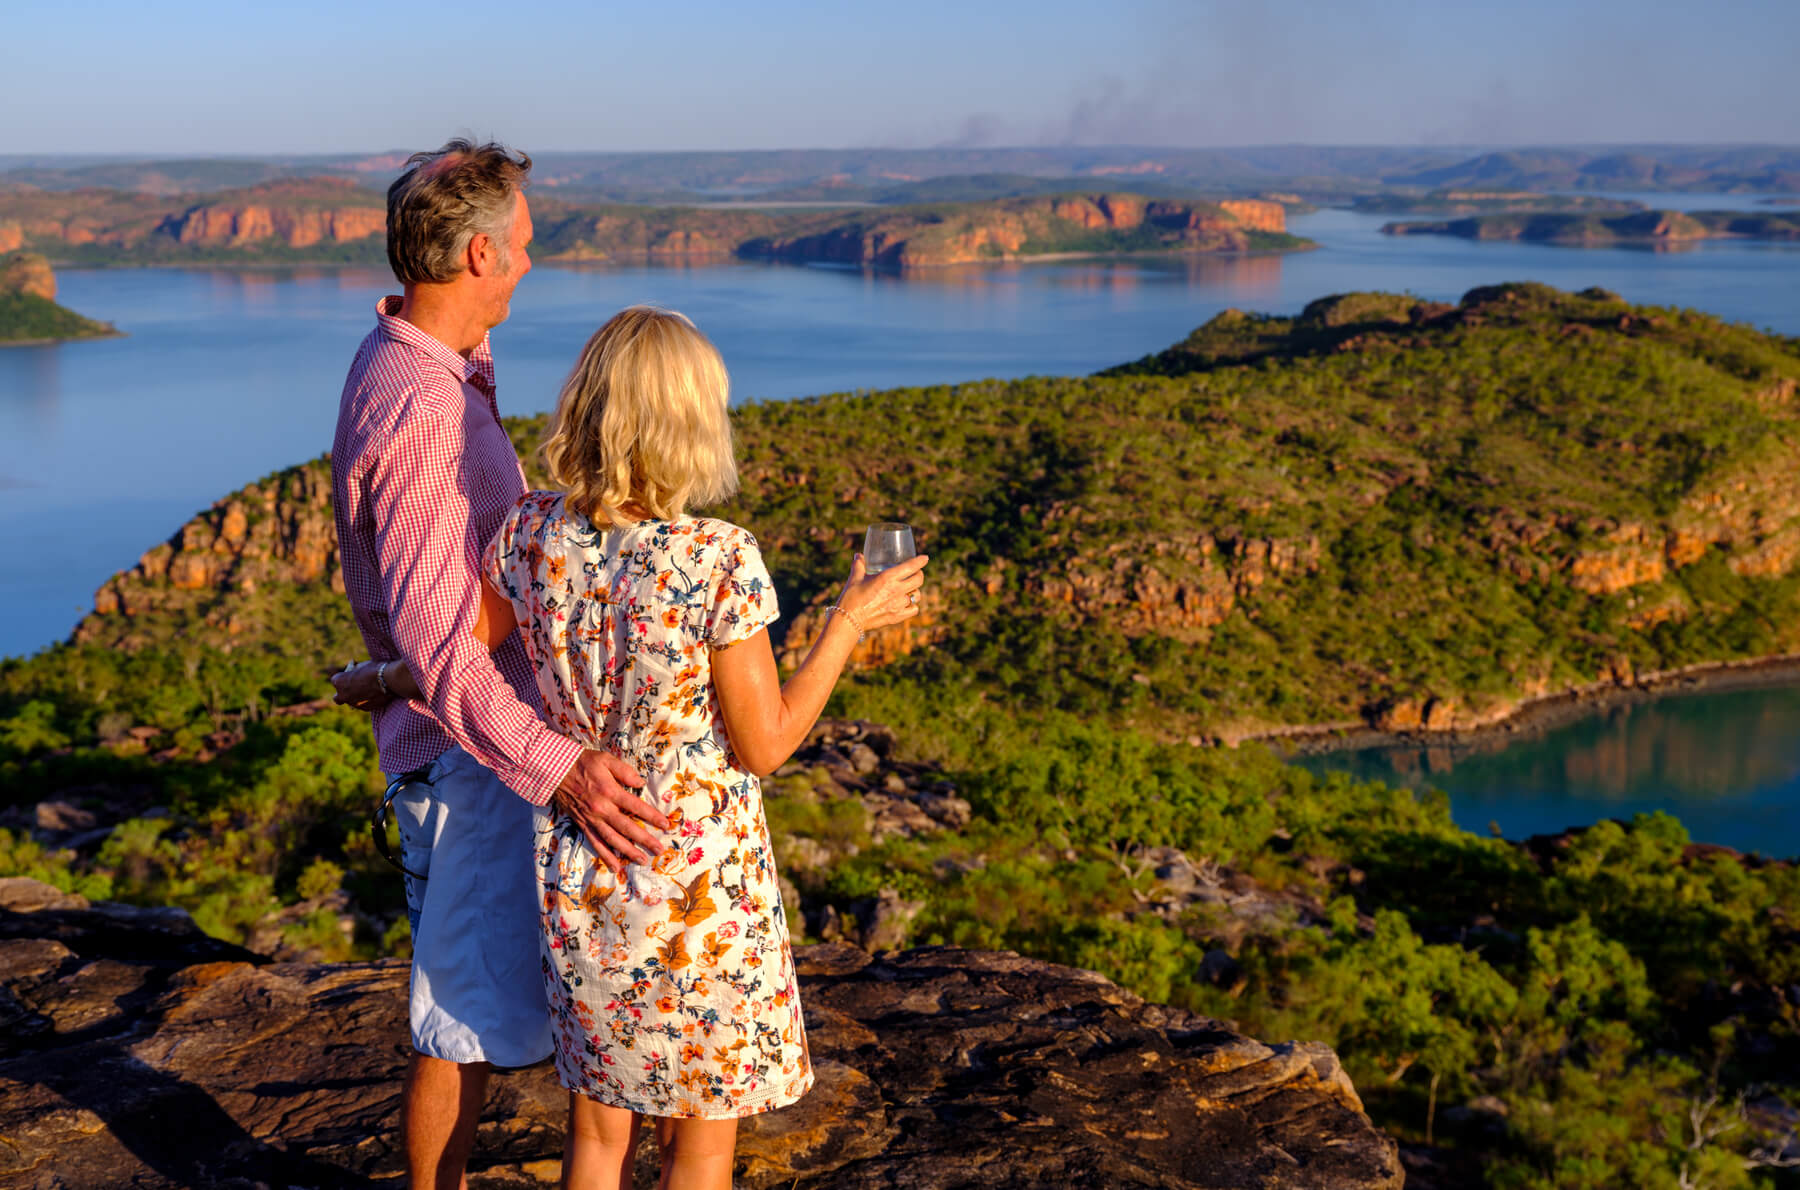 A couple enjoying a beautiful landscape in the Kimberley